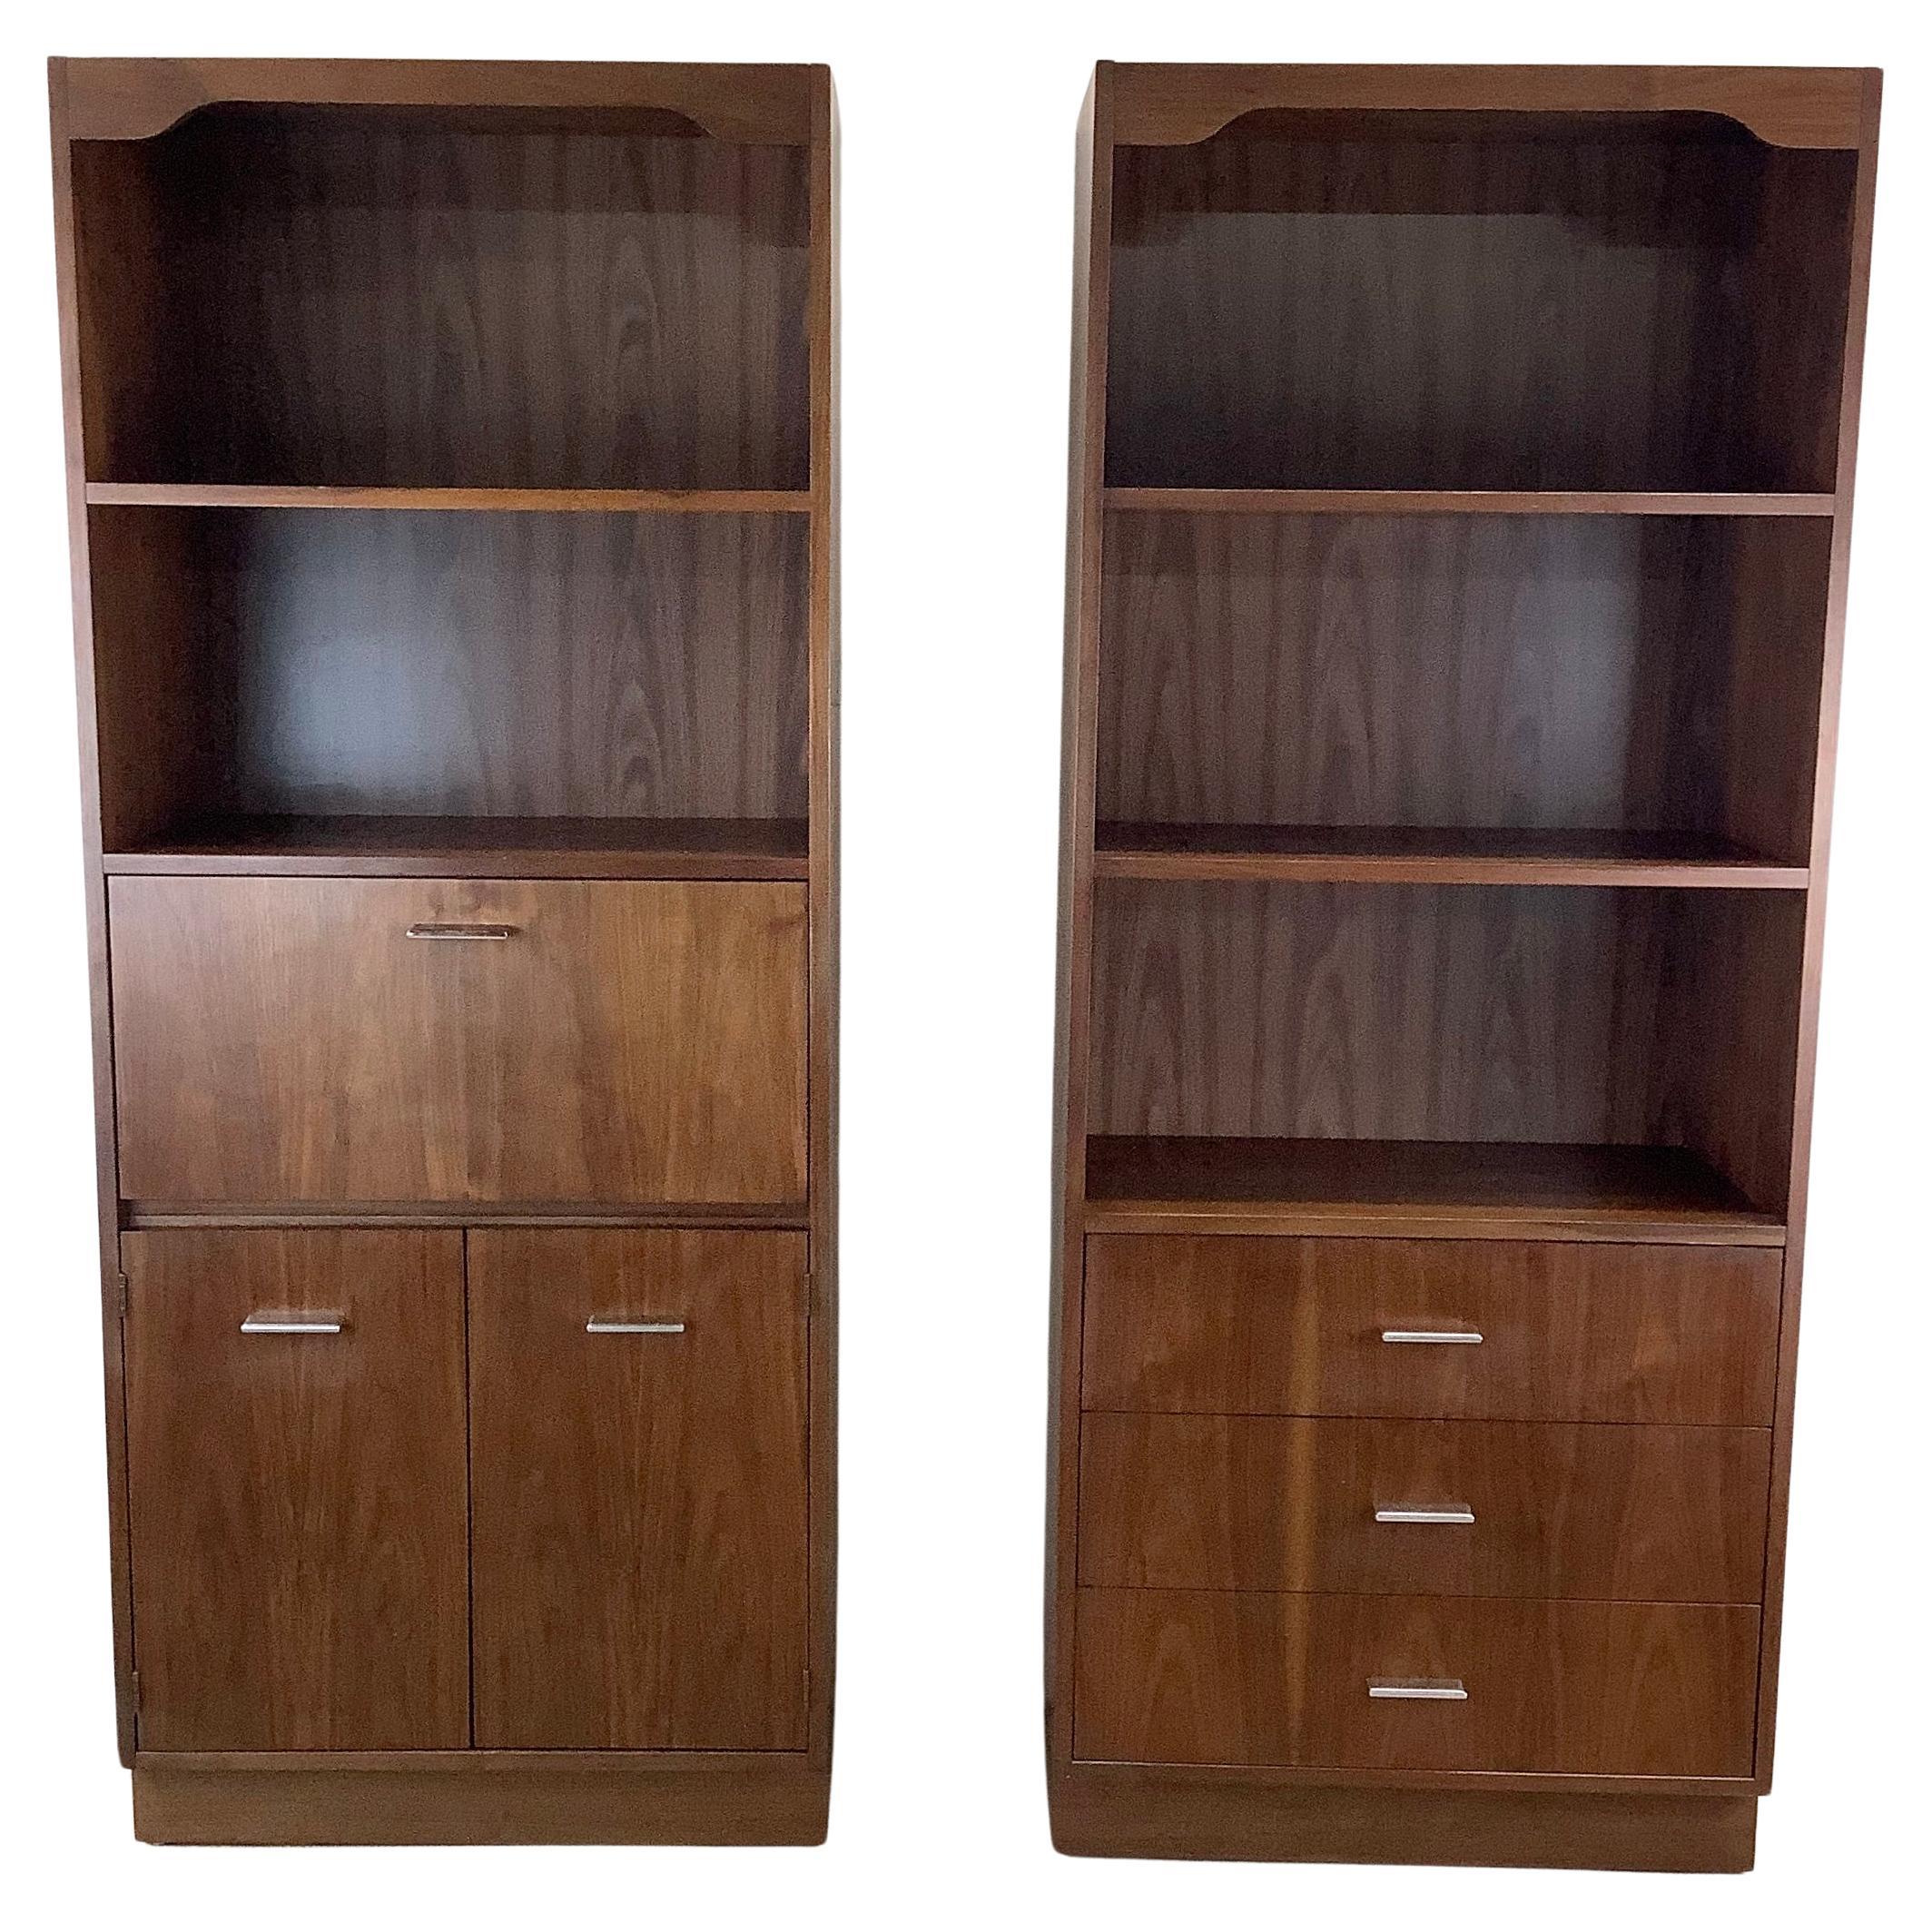 Tall Vintage Bookshelves With Drop Front Cabinet & Drawers